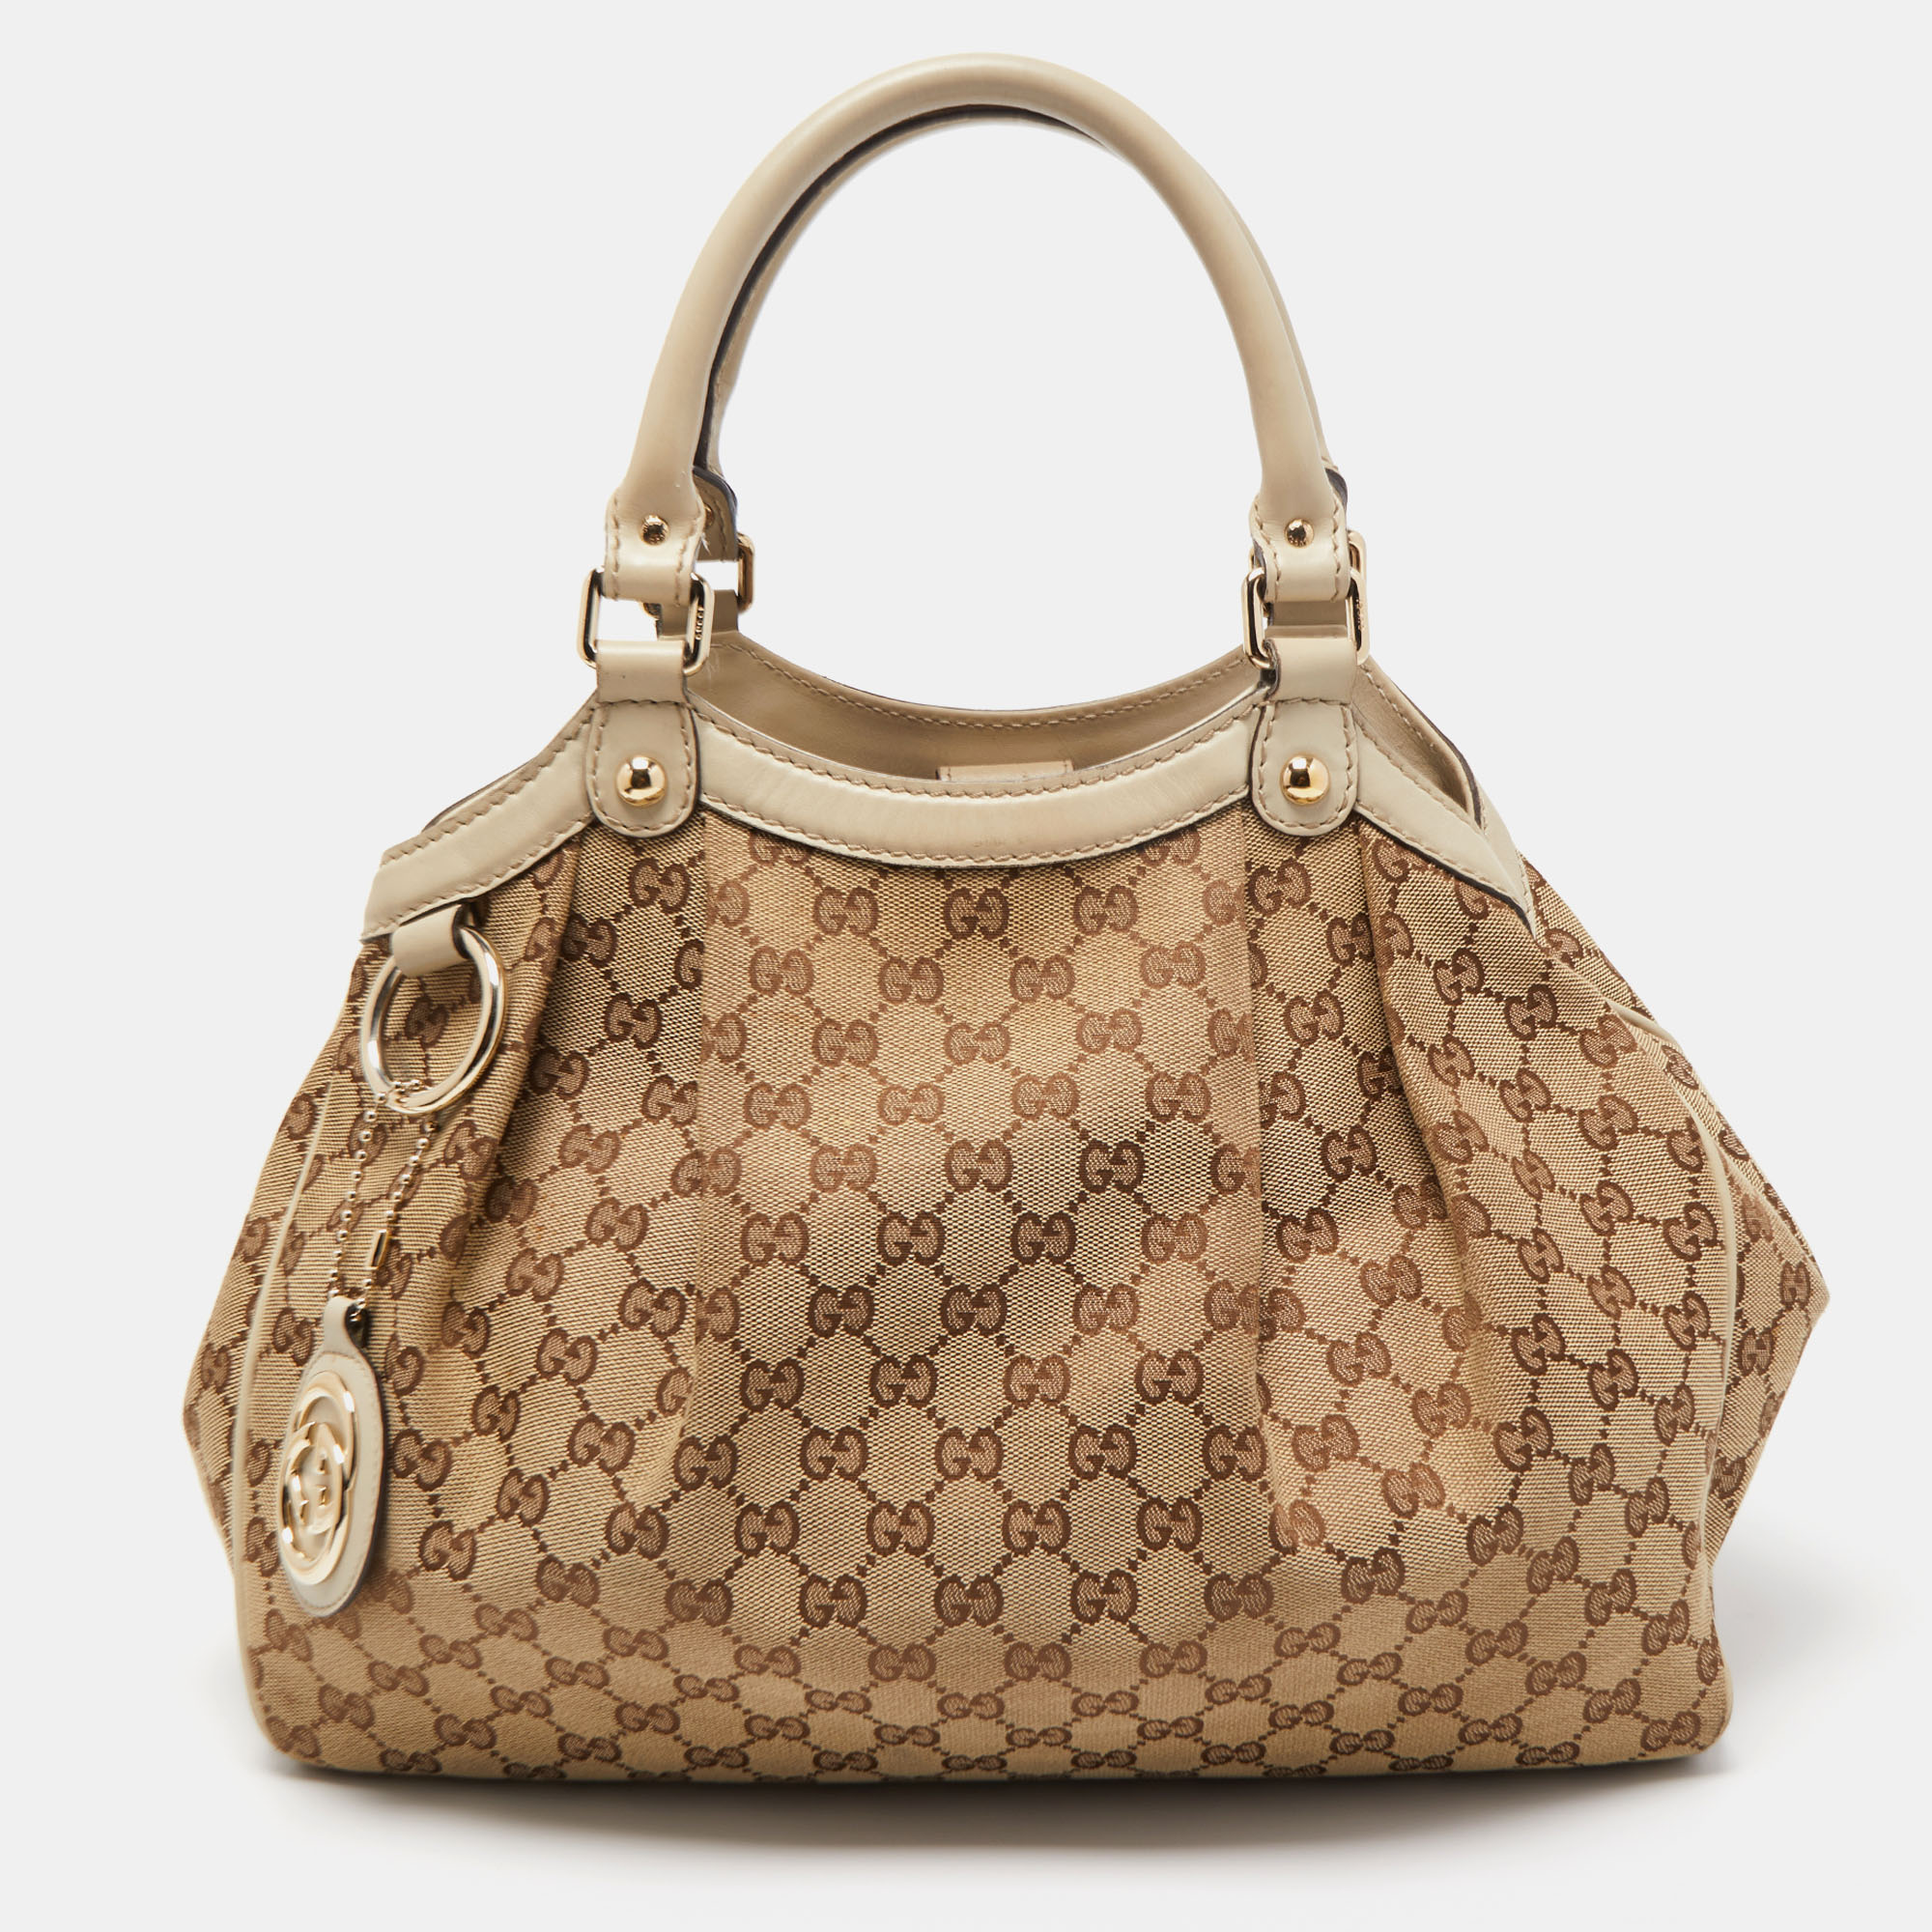 Gucci off white/beige gg canvas and leather medium sukey tote